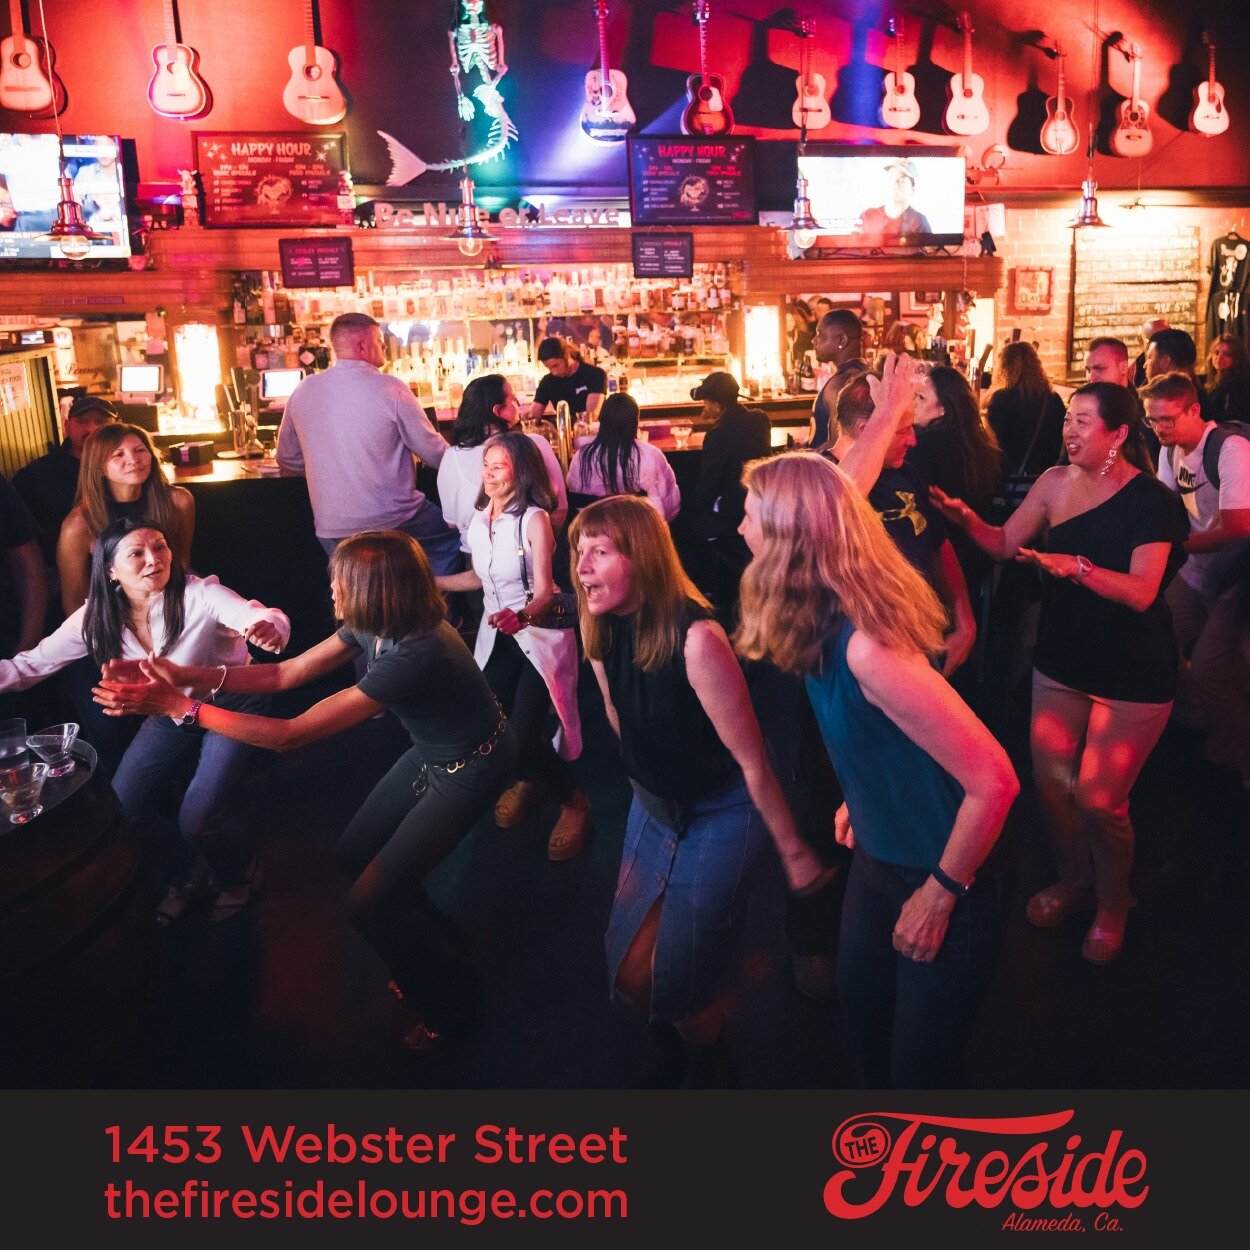 Stop by The Fireside Lounge for music, Guinness, and good times for St. Patrick&rsquo;s Day! They have tasty bar bites, excellent drinks, beer and shots! 

The Fireside Lounge
1453 Webster St.
www.thefiresidelounge.com

#thefiresidelounge #firesidelo